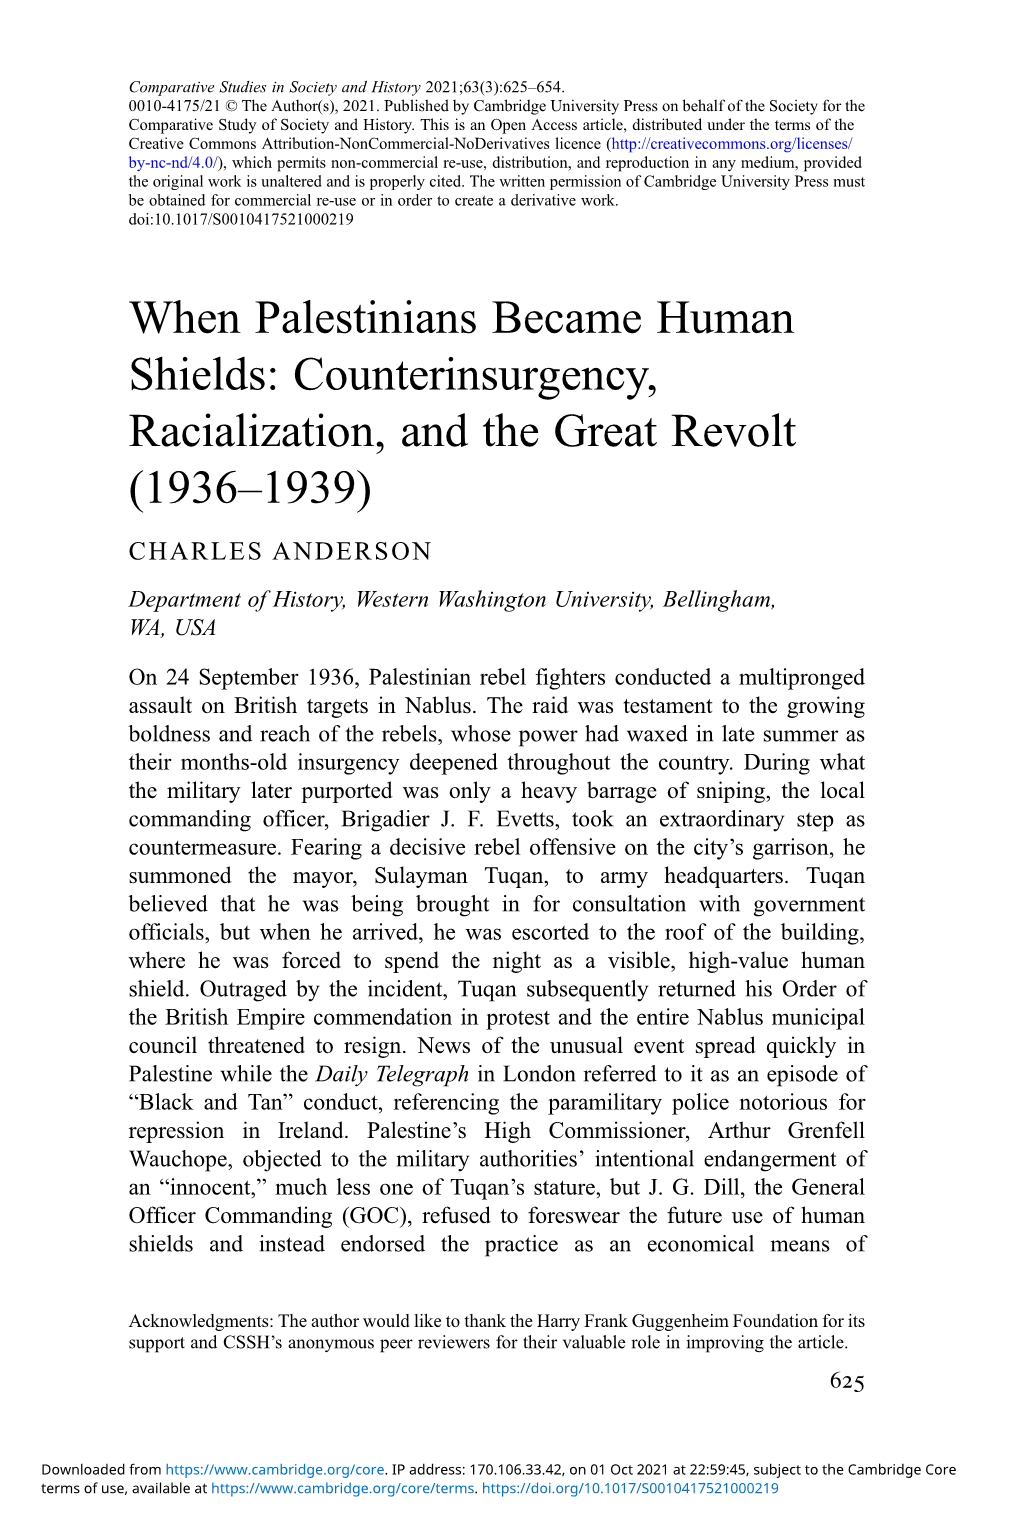 When Palestinians Became Human Shields: Counterinsurgency, Racialization, and the Great Revolt (1936–1939)